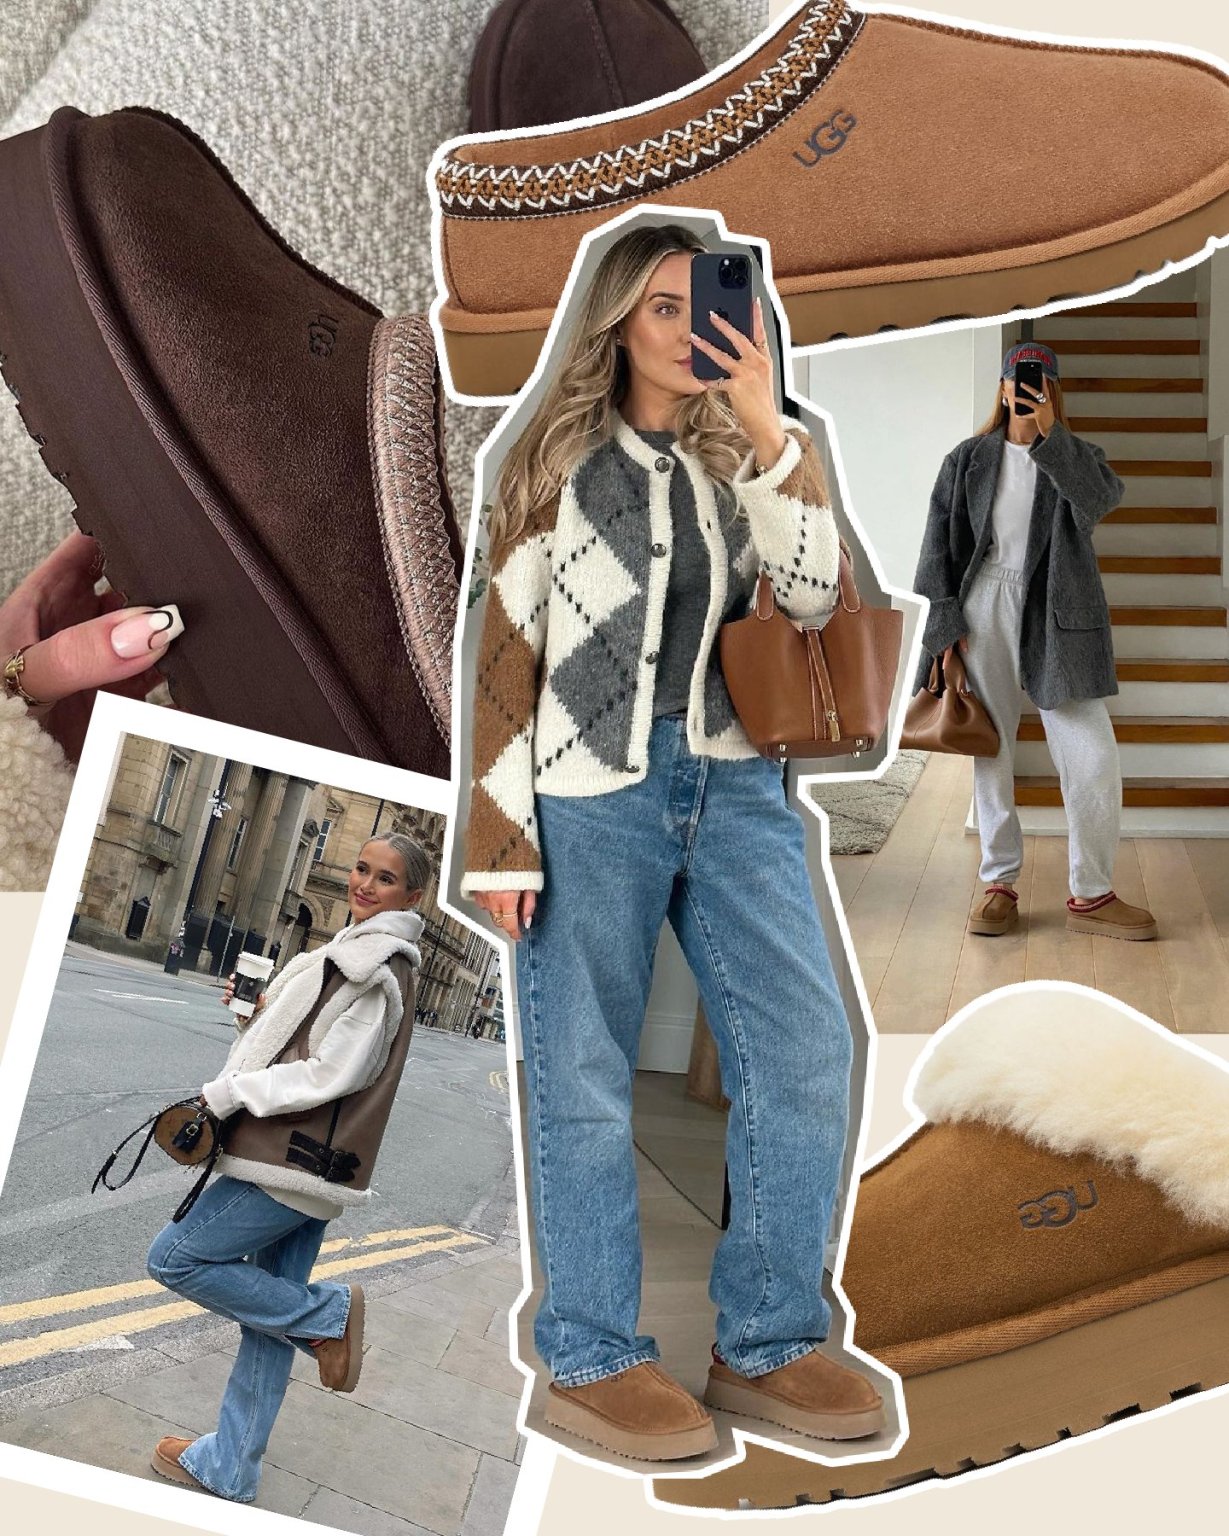 Ugg Classic Mini: the unexpected trending boots you'll wear all winter